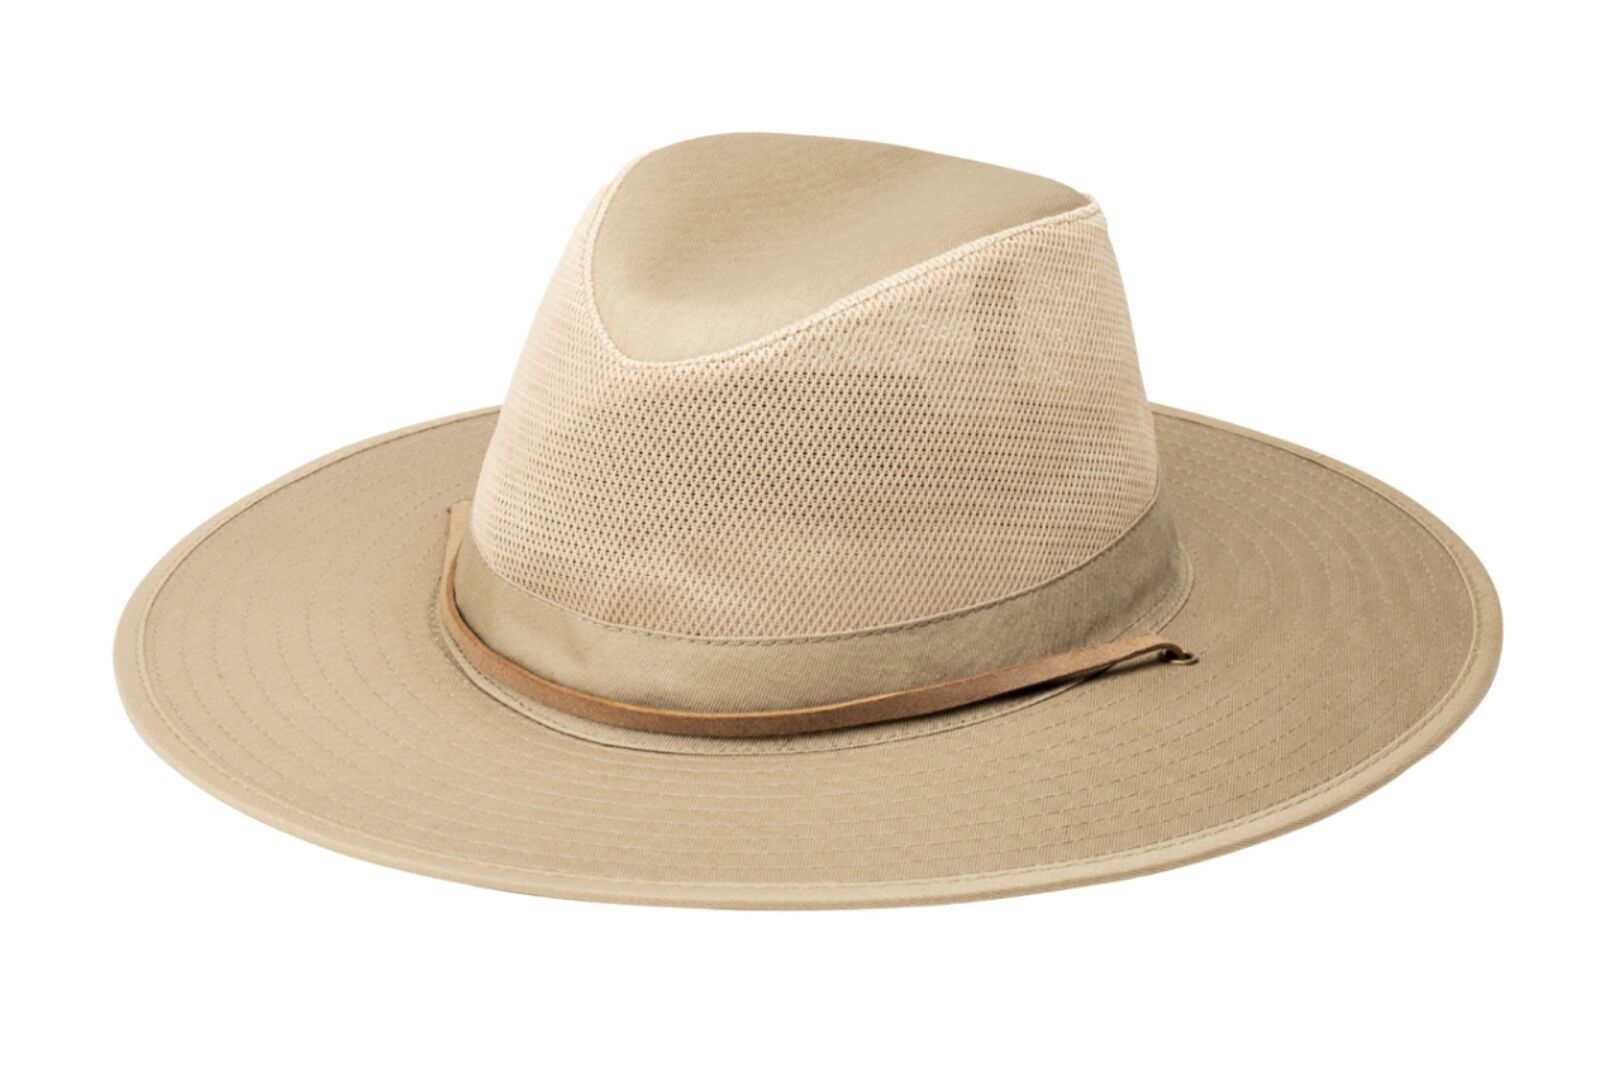 Peter Grimm Stream Hat essential travel gear for Southeast Asia 